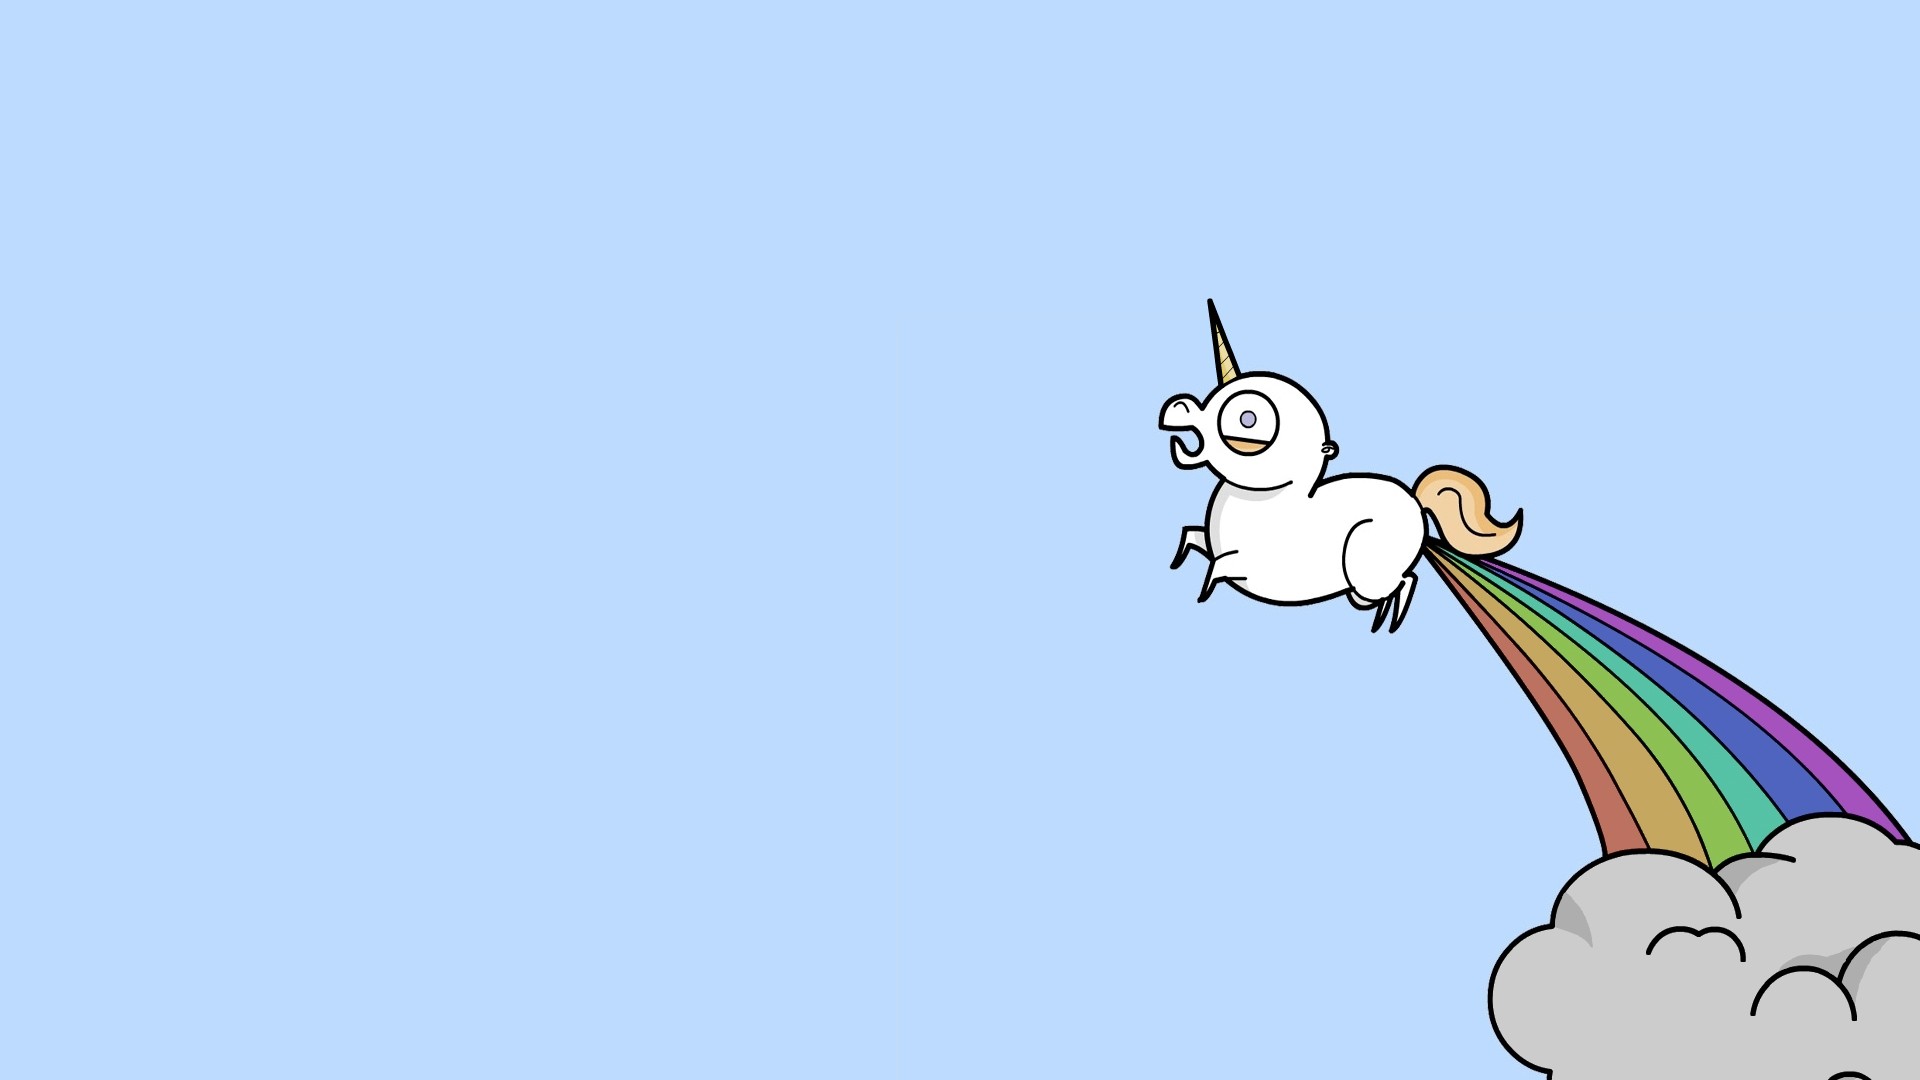 Cute Girly Unicorn Wallpaper with high-resolution 1920x1080 pixel. You can use this wallpaper for your Windows and Mac OS computers as well as your Android and iPhone smartphones